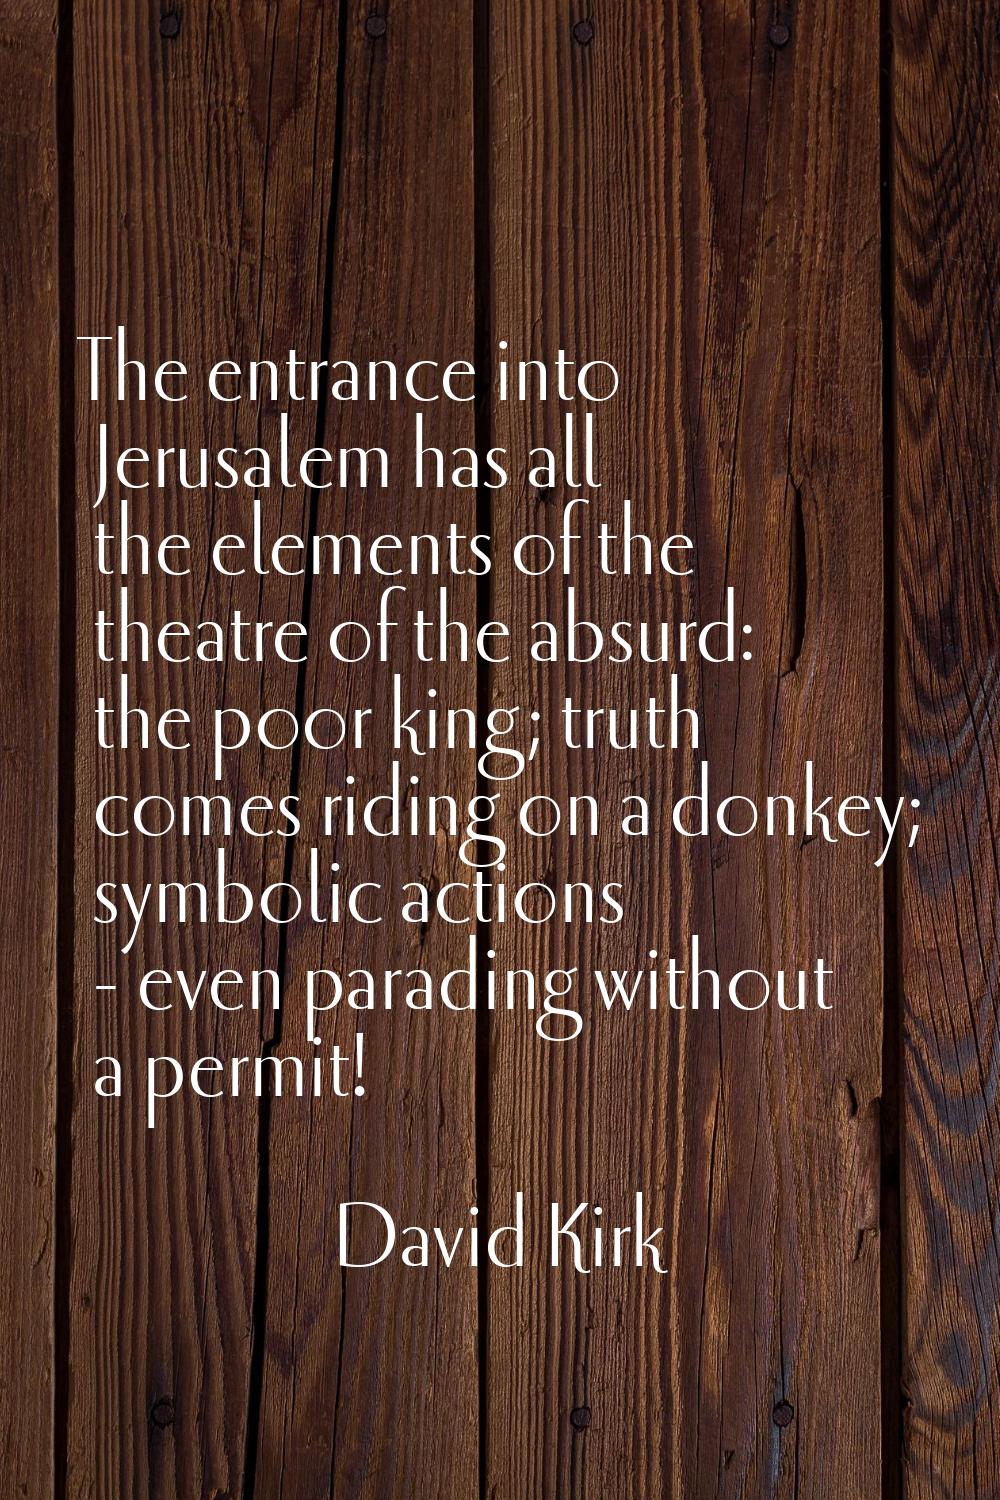 The entrance into Jerusalem has all the elements of the theatre of the absurd: the poor king; truth